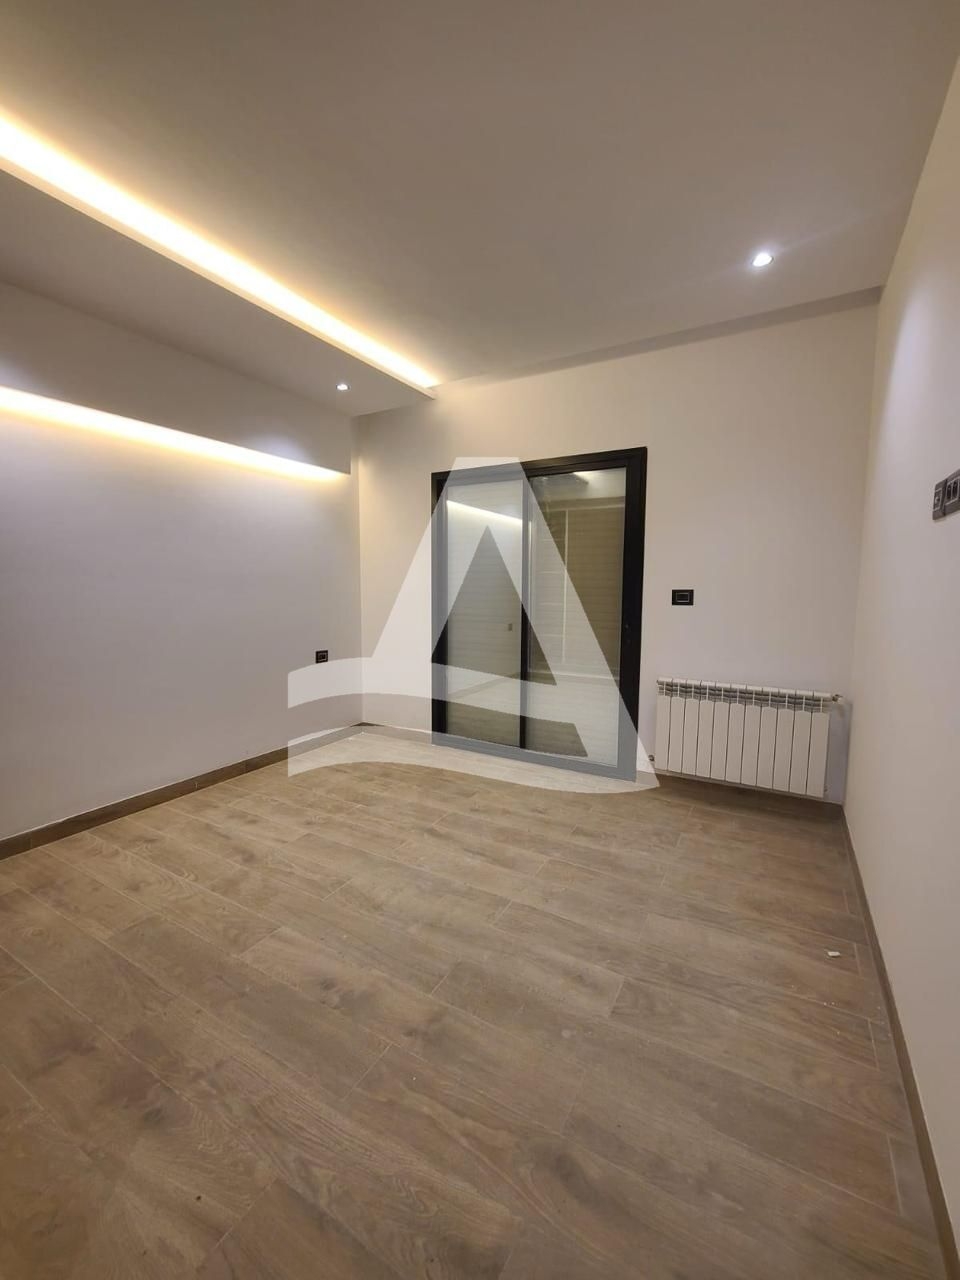 A vendre appartement neuf a ain zaghouen nord image 4